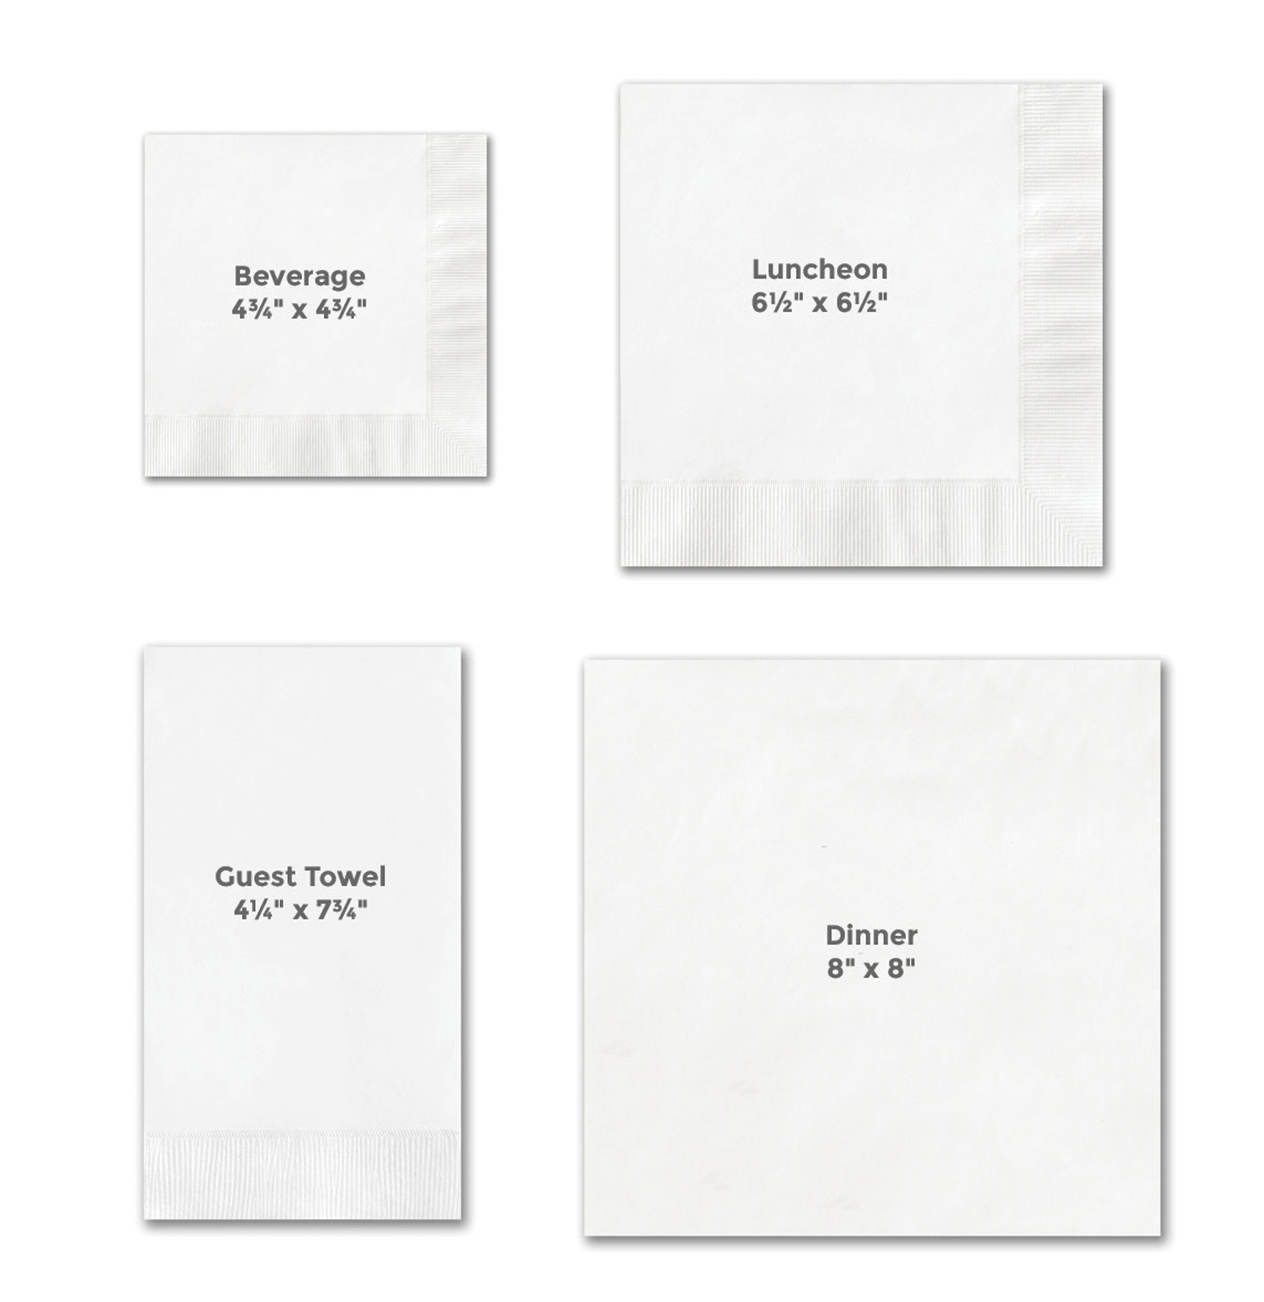 Blank wholesale napkins shown in white with sizes and product names.